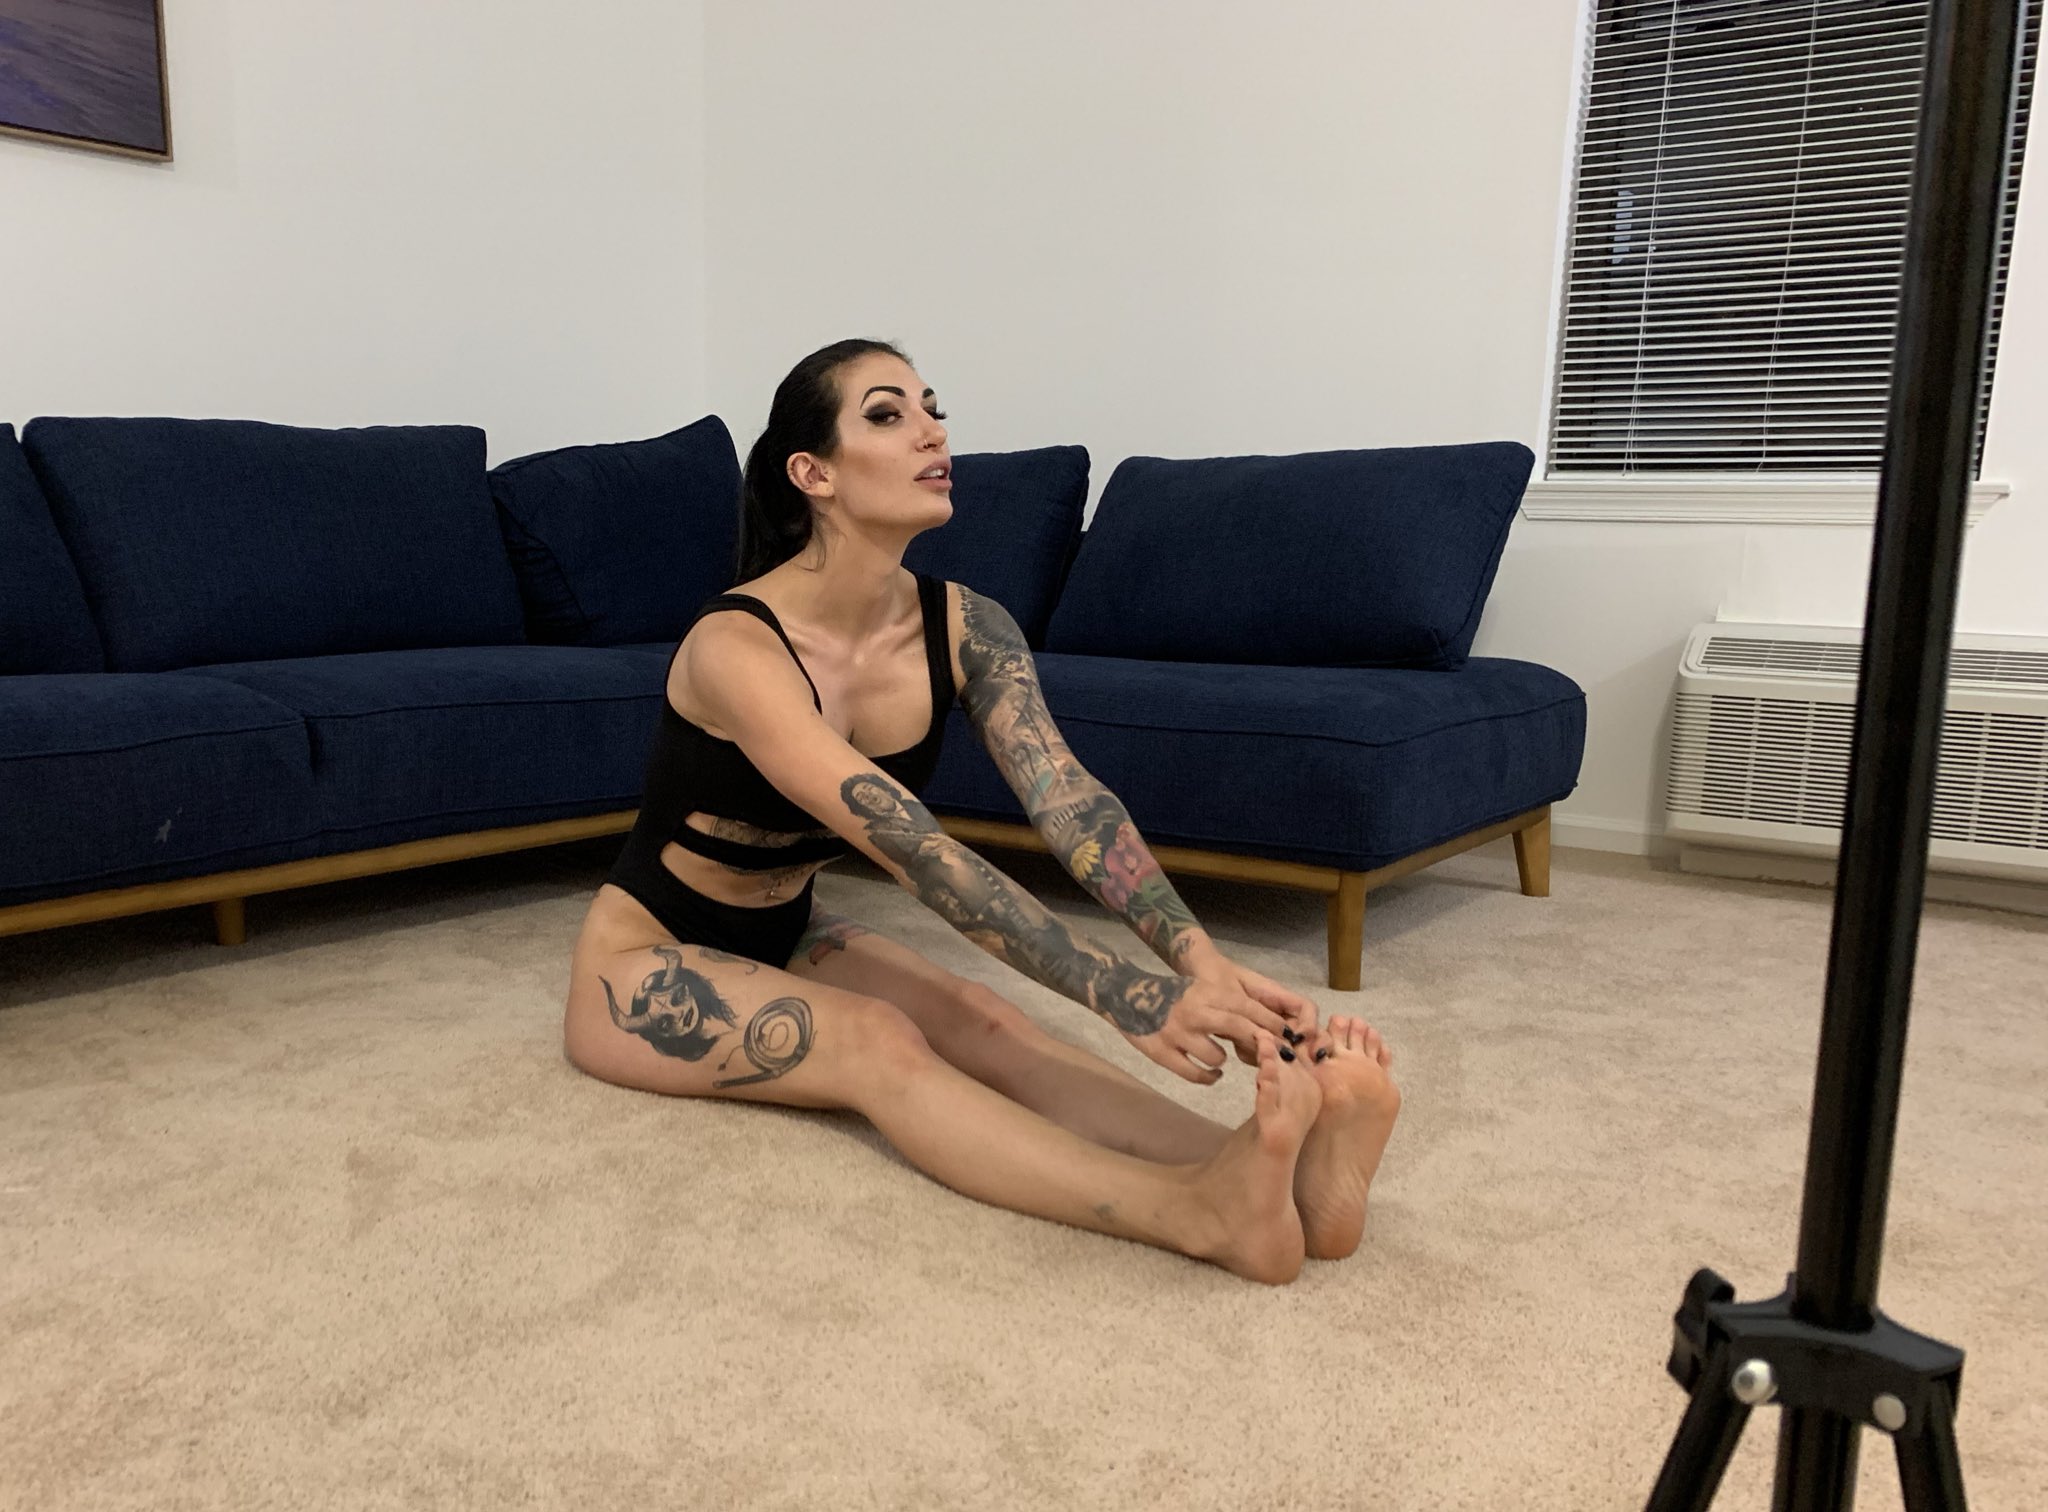 “Stretching before my wrestling/scissoring shoot with @PhillyFemdom13 &...